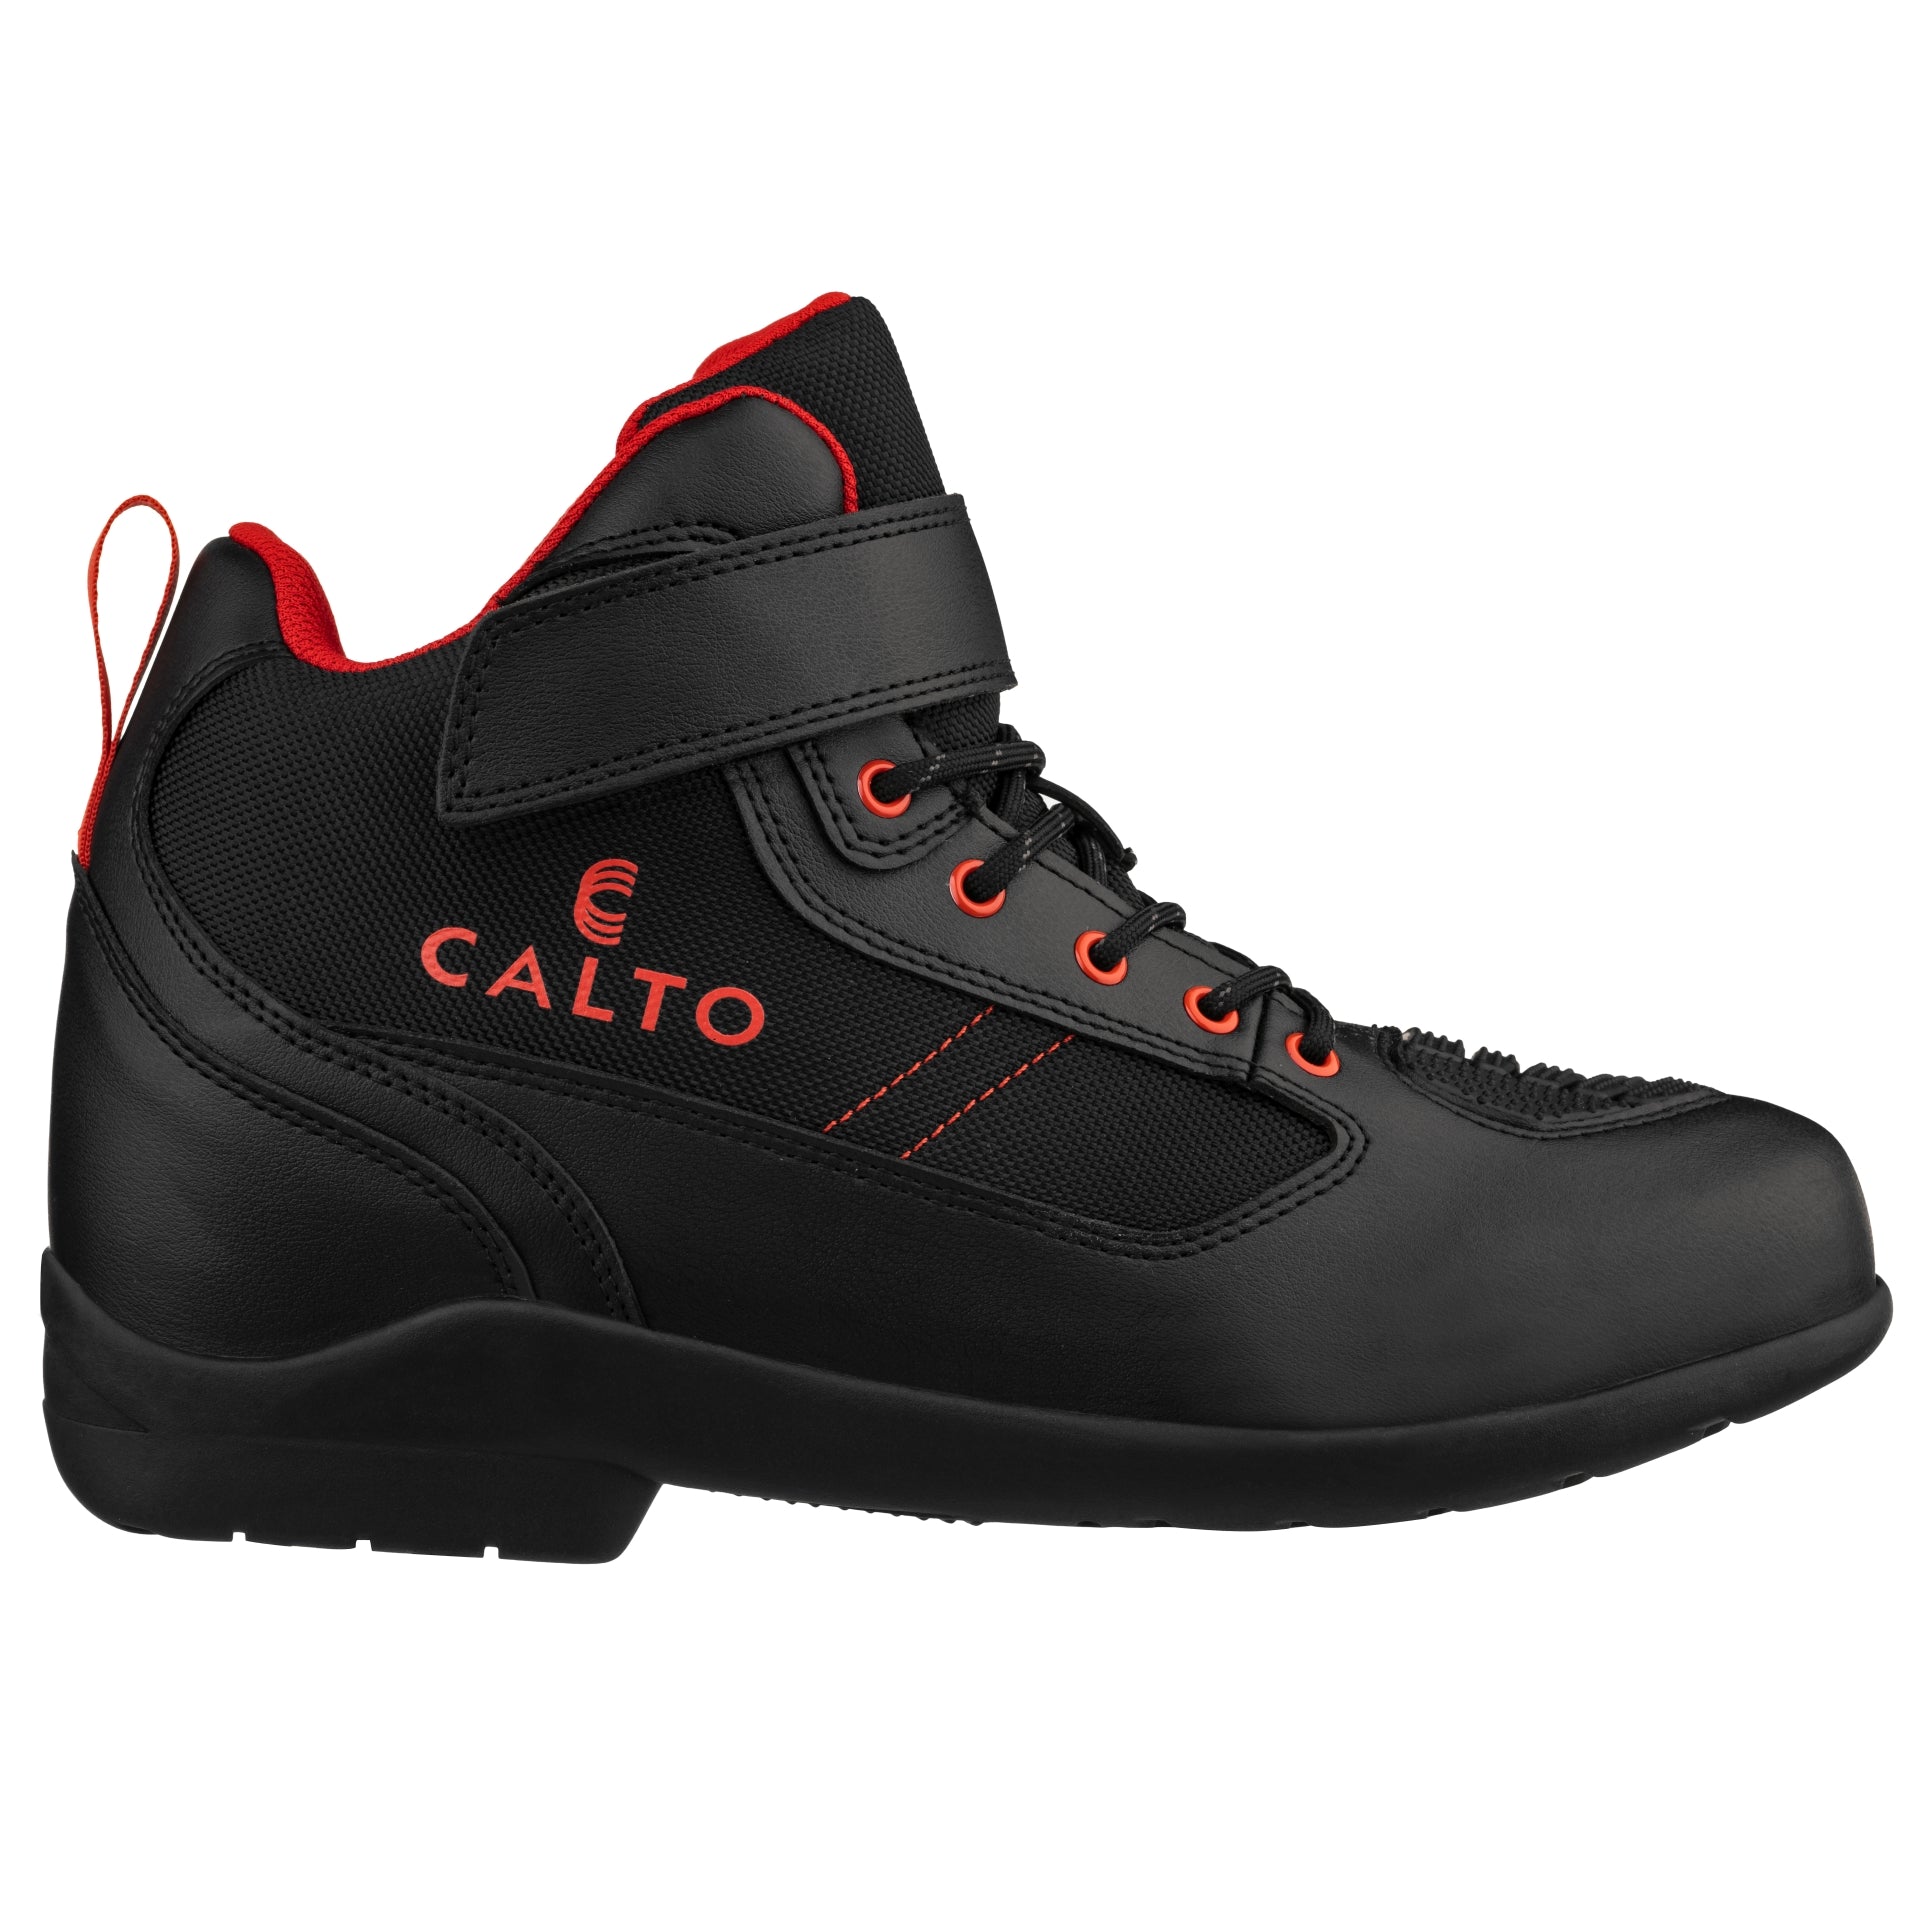 CALTO - S4039 - 3.2 Inches Taller (Black/Red) - Motorcycle Boots